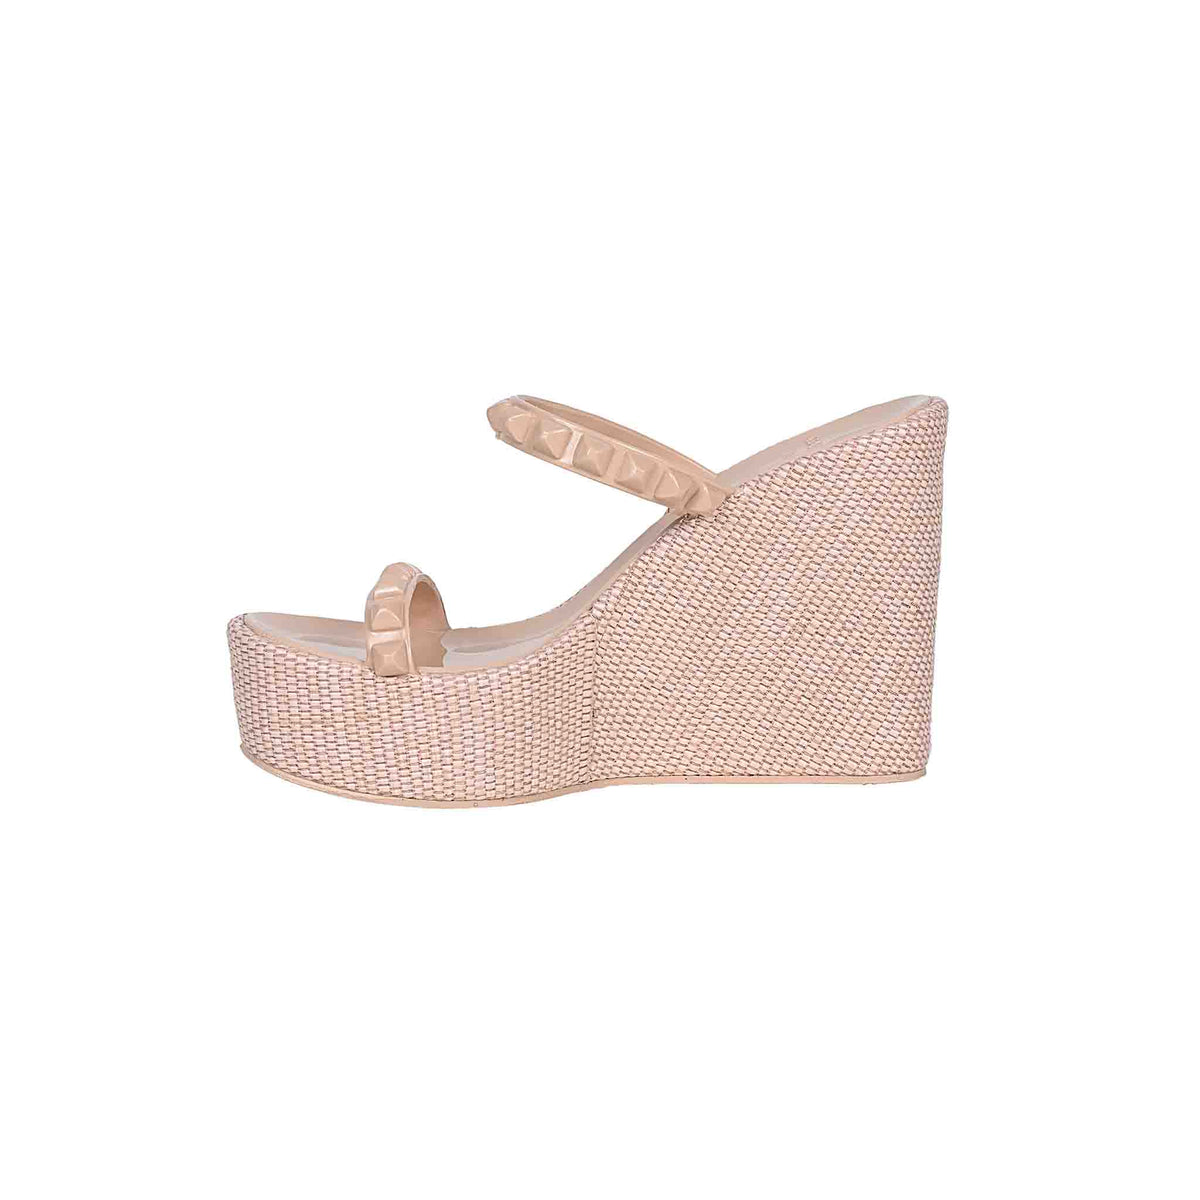 Blush in color Melissa Shoes Designed for relaxation, these wedges offer a comfortable lift without compromising on style, making them ideal for leisurely beach walks.